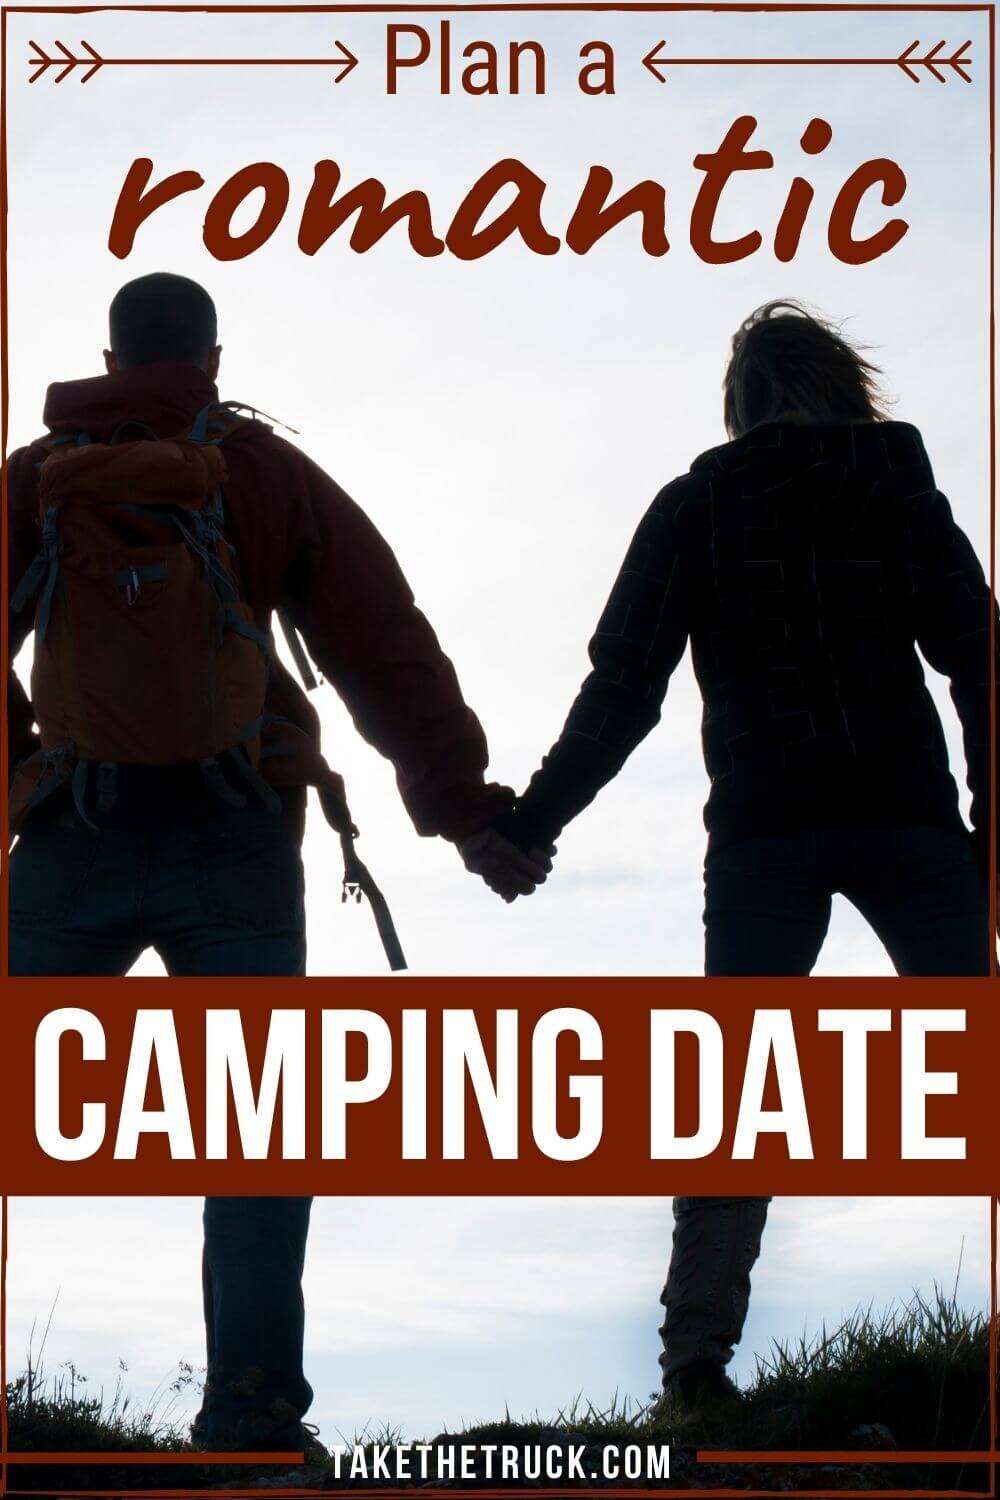 debbie mounce share college couples camping trip photos